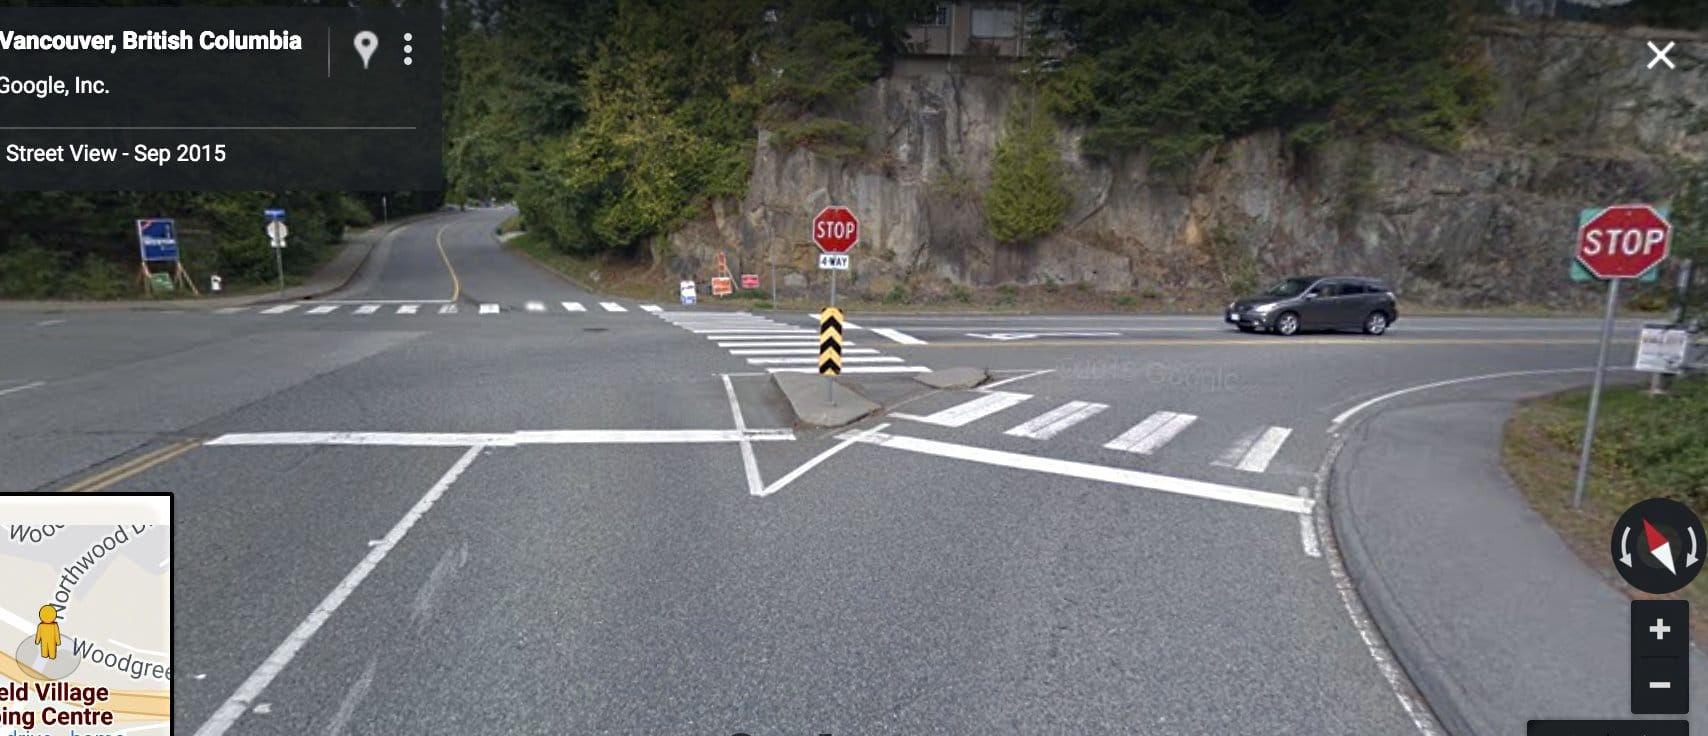 Caulfield intersection West Vancouver 4-way-stop 